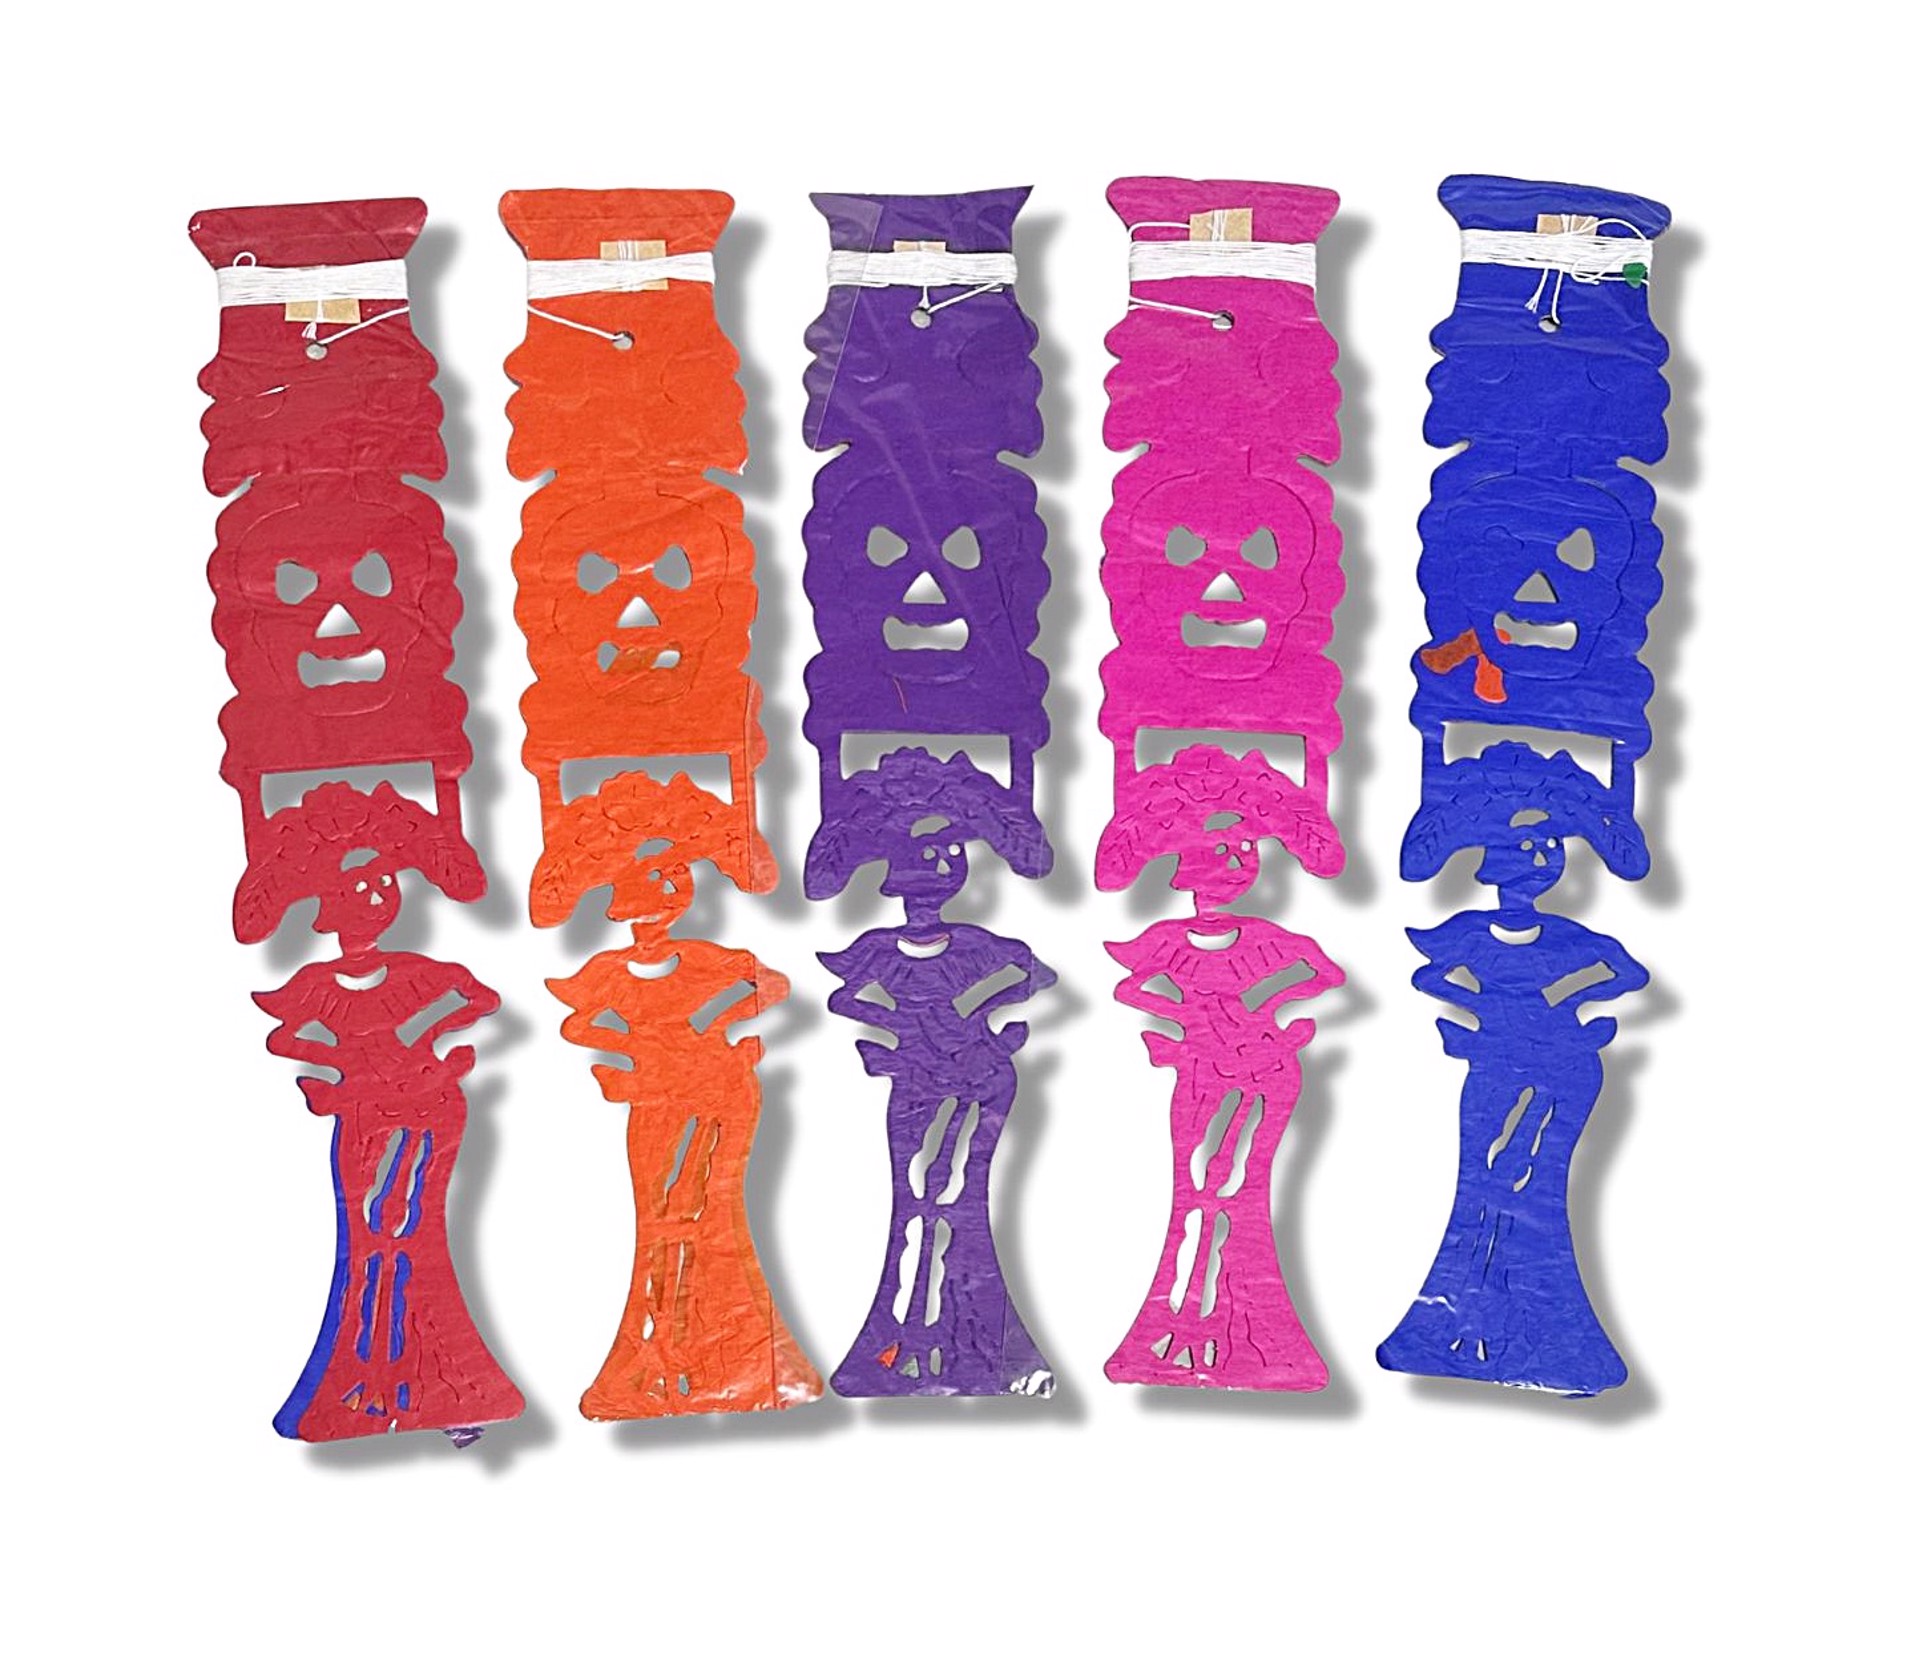 Papel Picado - Tissue Paper Catrinas, Assorted Colors by Indigo Desert Ranch - Day of the Dead